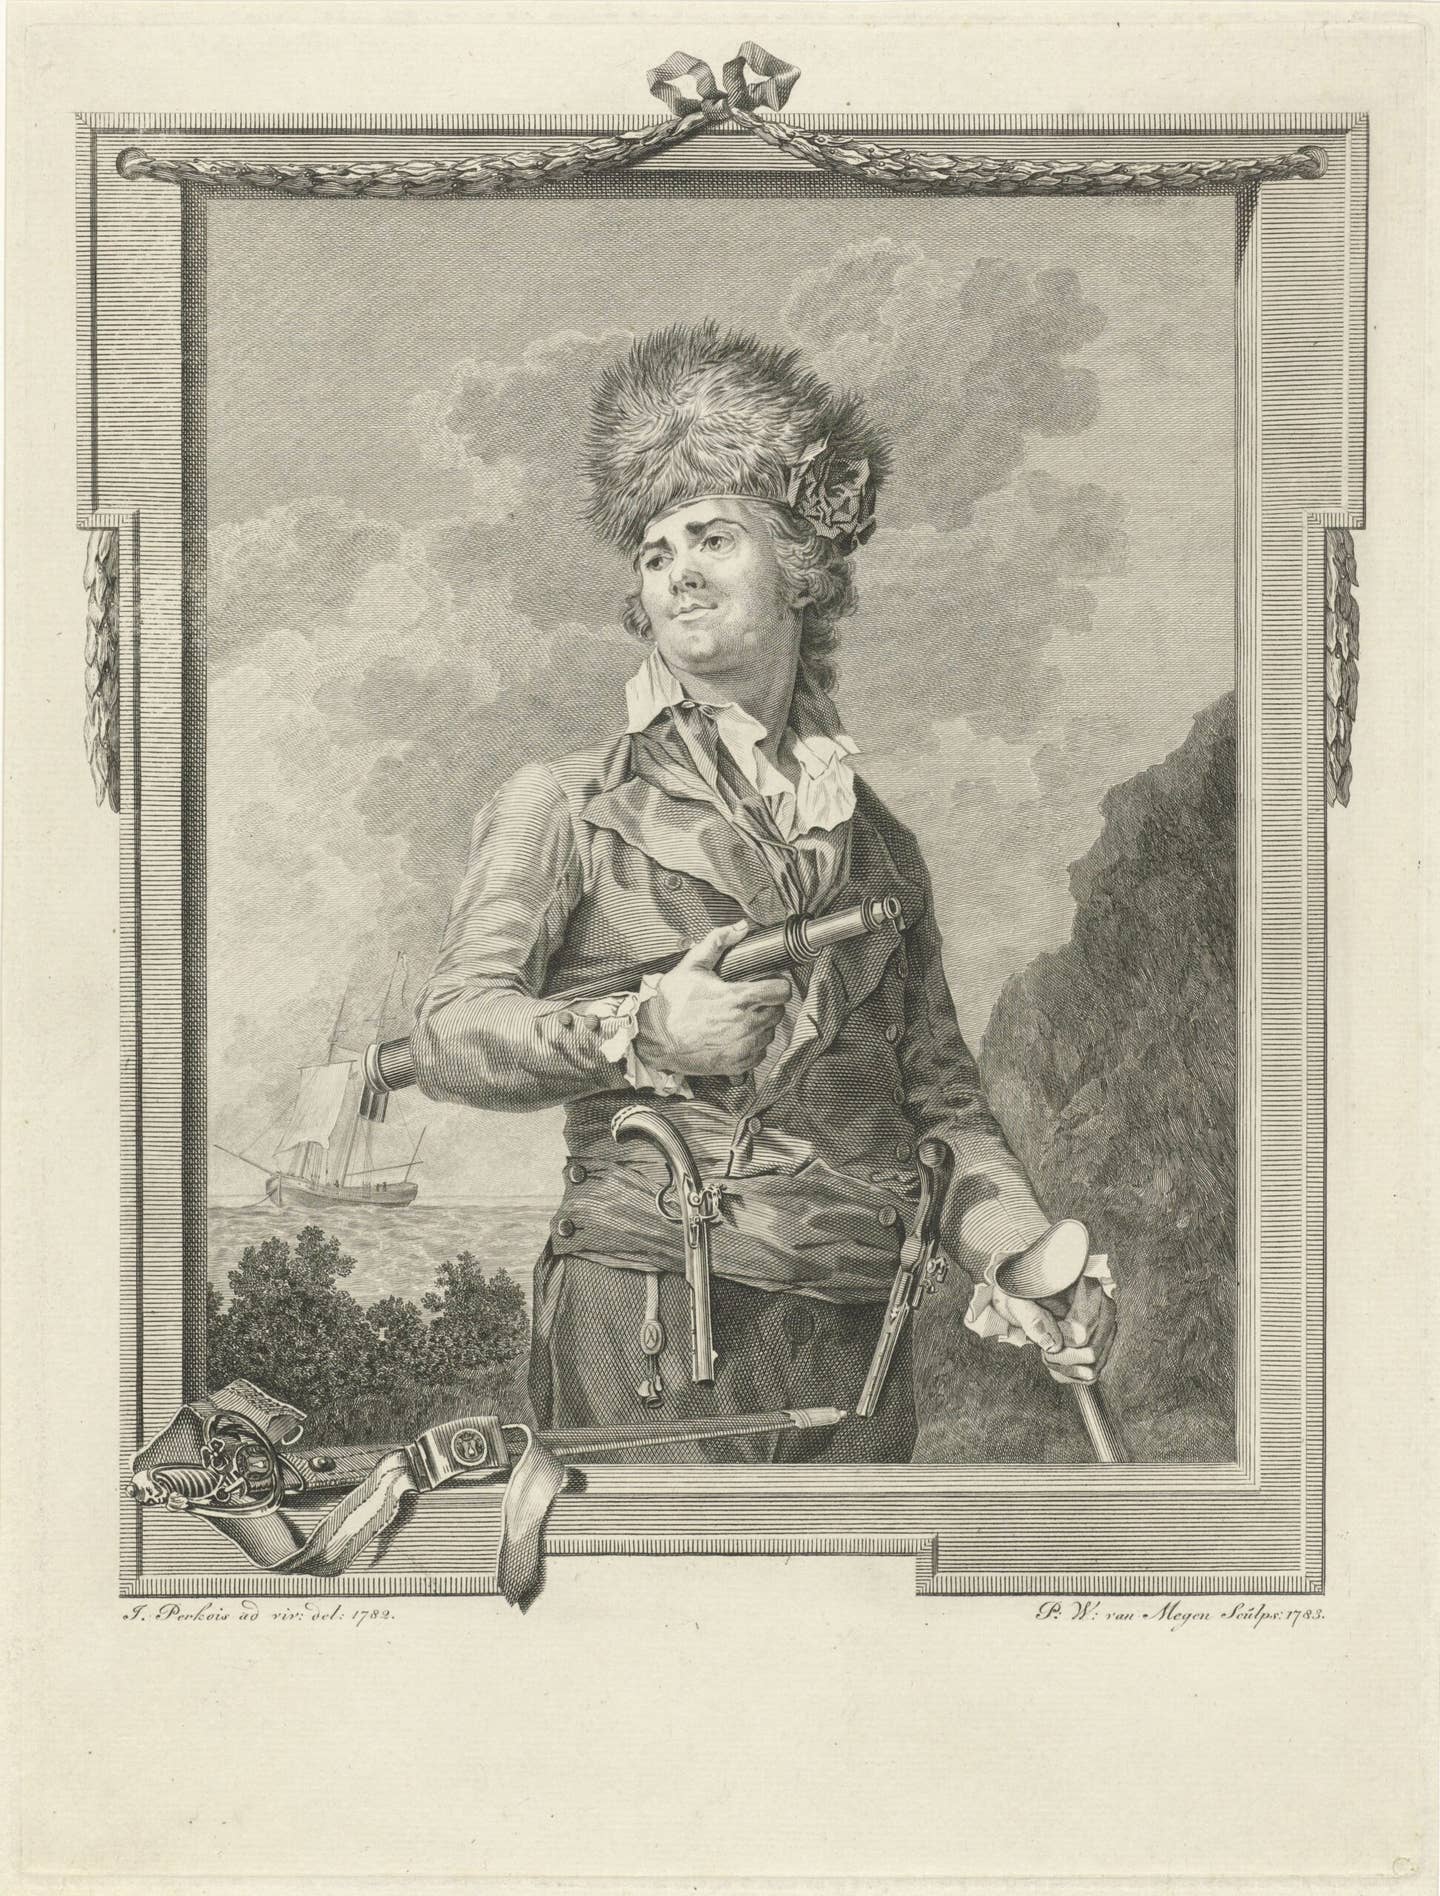 A portrait of the 18th-century French privateer captain Pierre le Turcq, by Pieter Willem van Megen, dated 1783, complete with pistols on his belt and a short sword in the foreground. <em>Photo by Sepia Times/Universal Images Group via Getty Images</em>